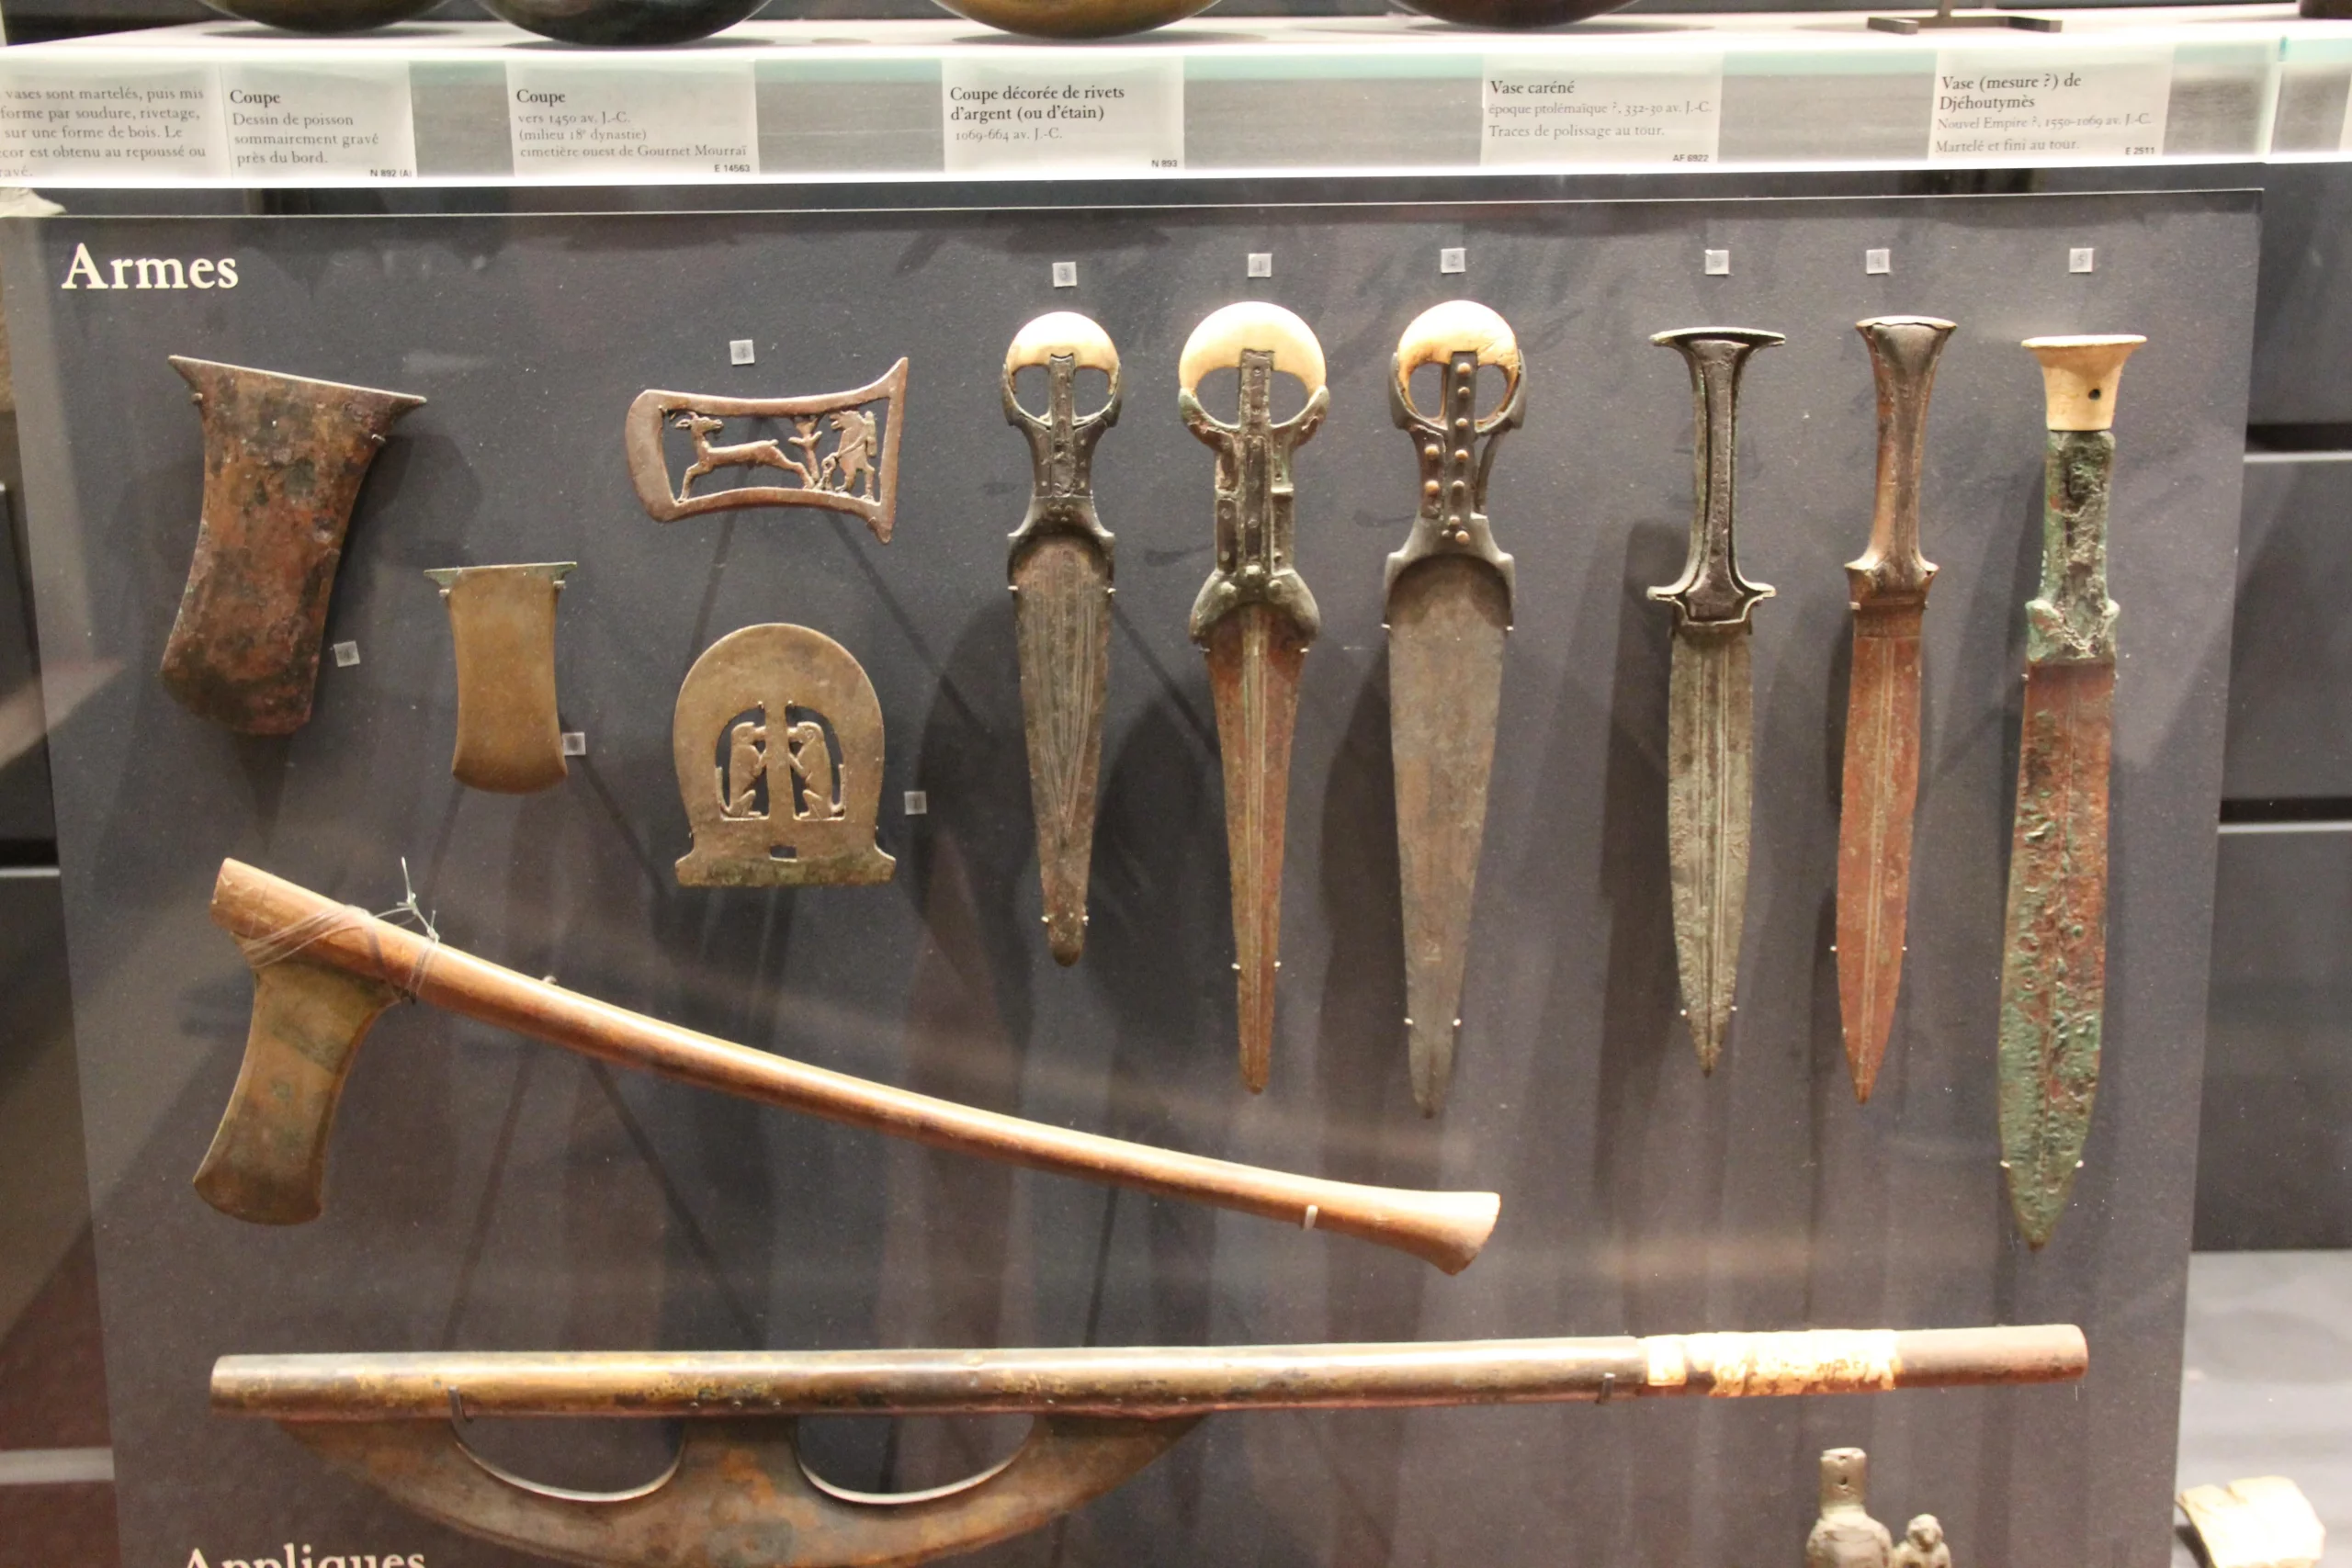 weapons of ancient egypt: tools of war and dominance